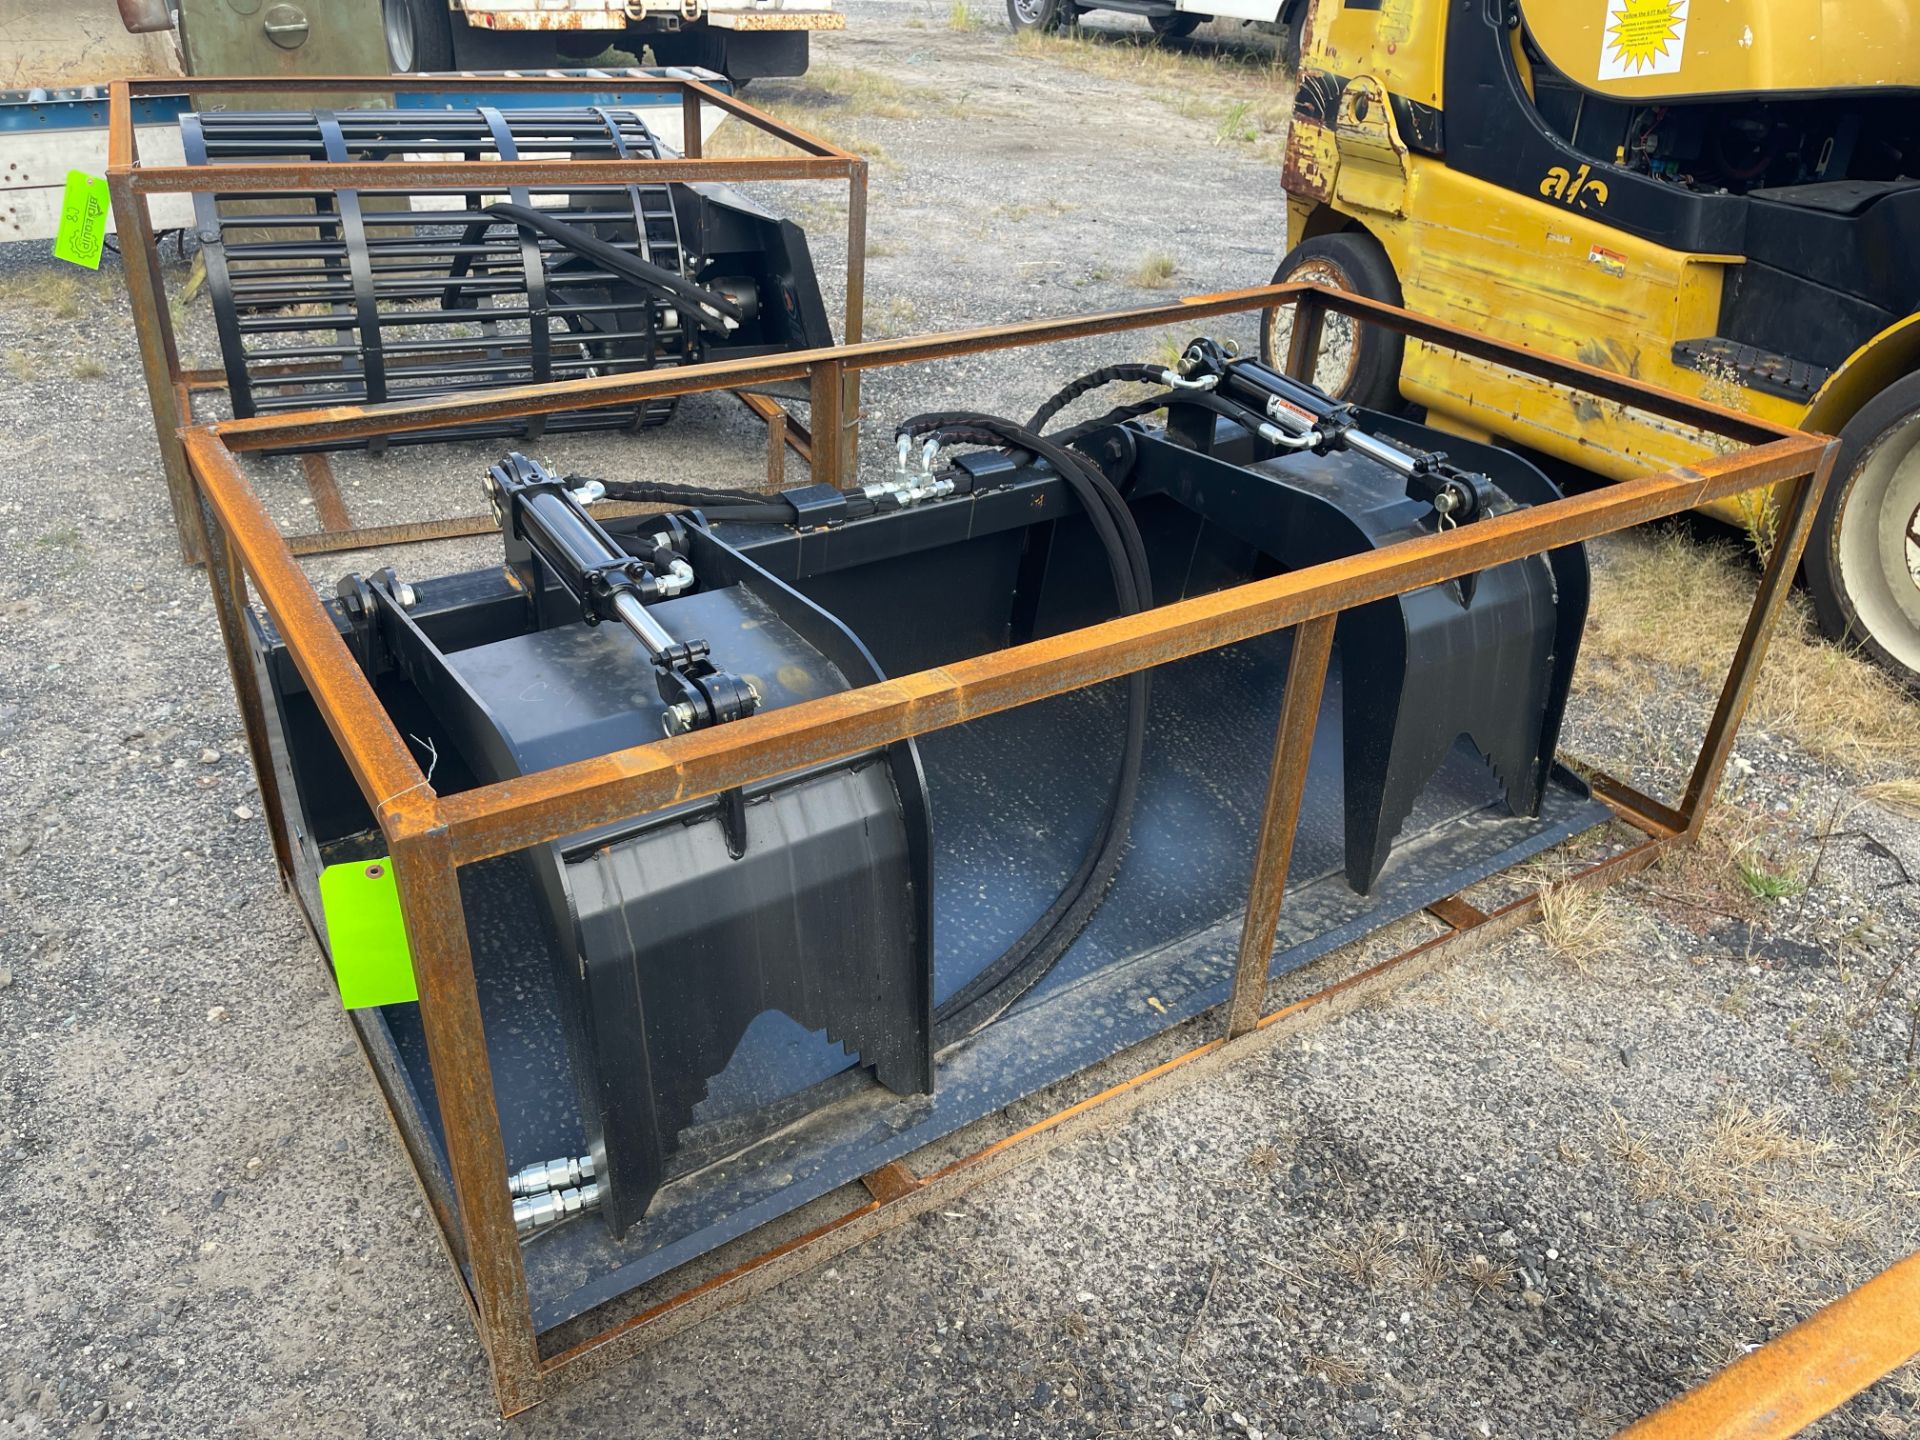 New Wolverine Skid Steer Hydraulic Grappler Bucket (C9) - Located in Lester, PA